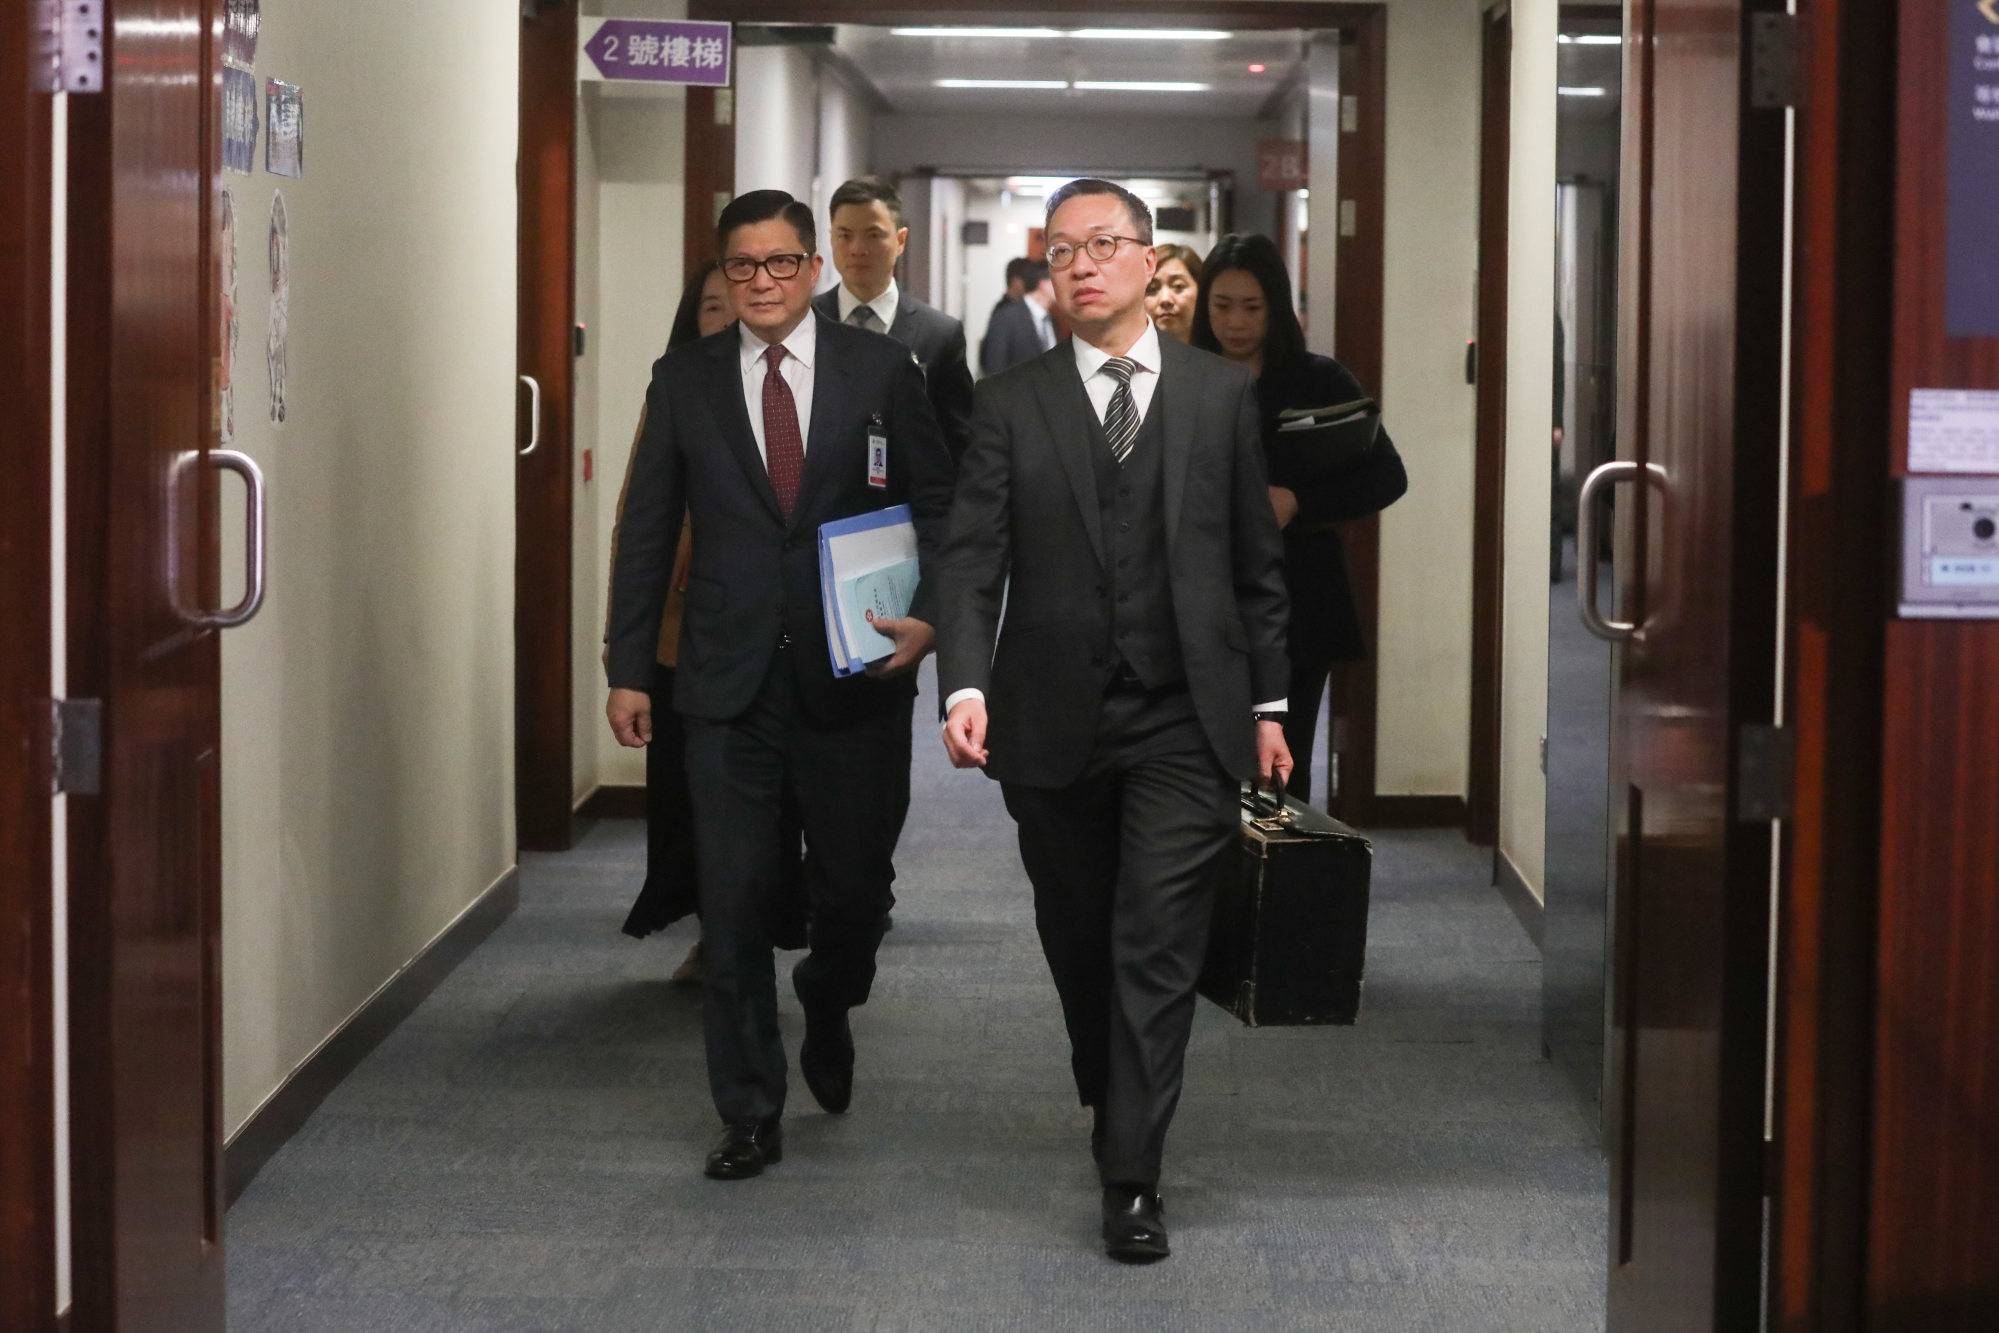 Secretary for Justice Paul Lam and Secretary for Security Chris Tang leave after a meeting of the bills committee on Tuesday. Photo: Sun Yeung